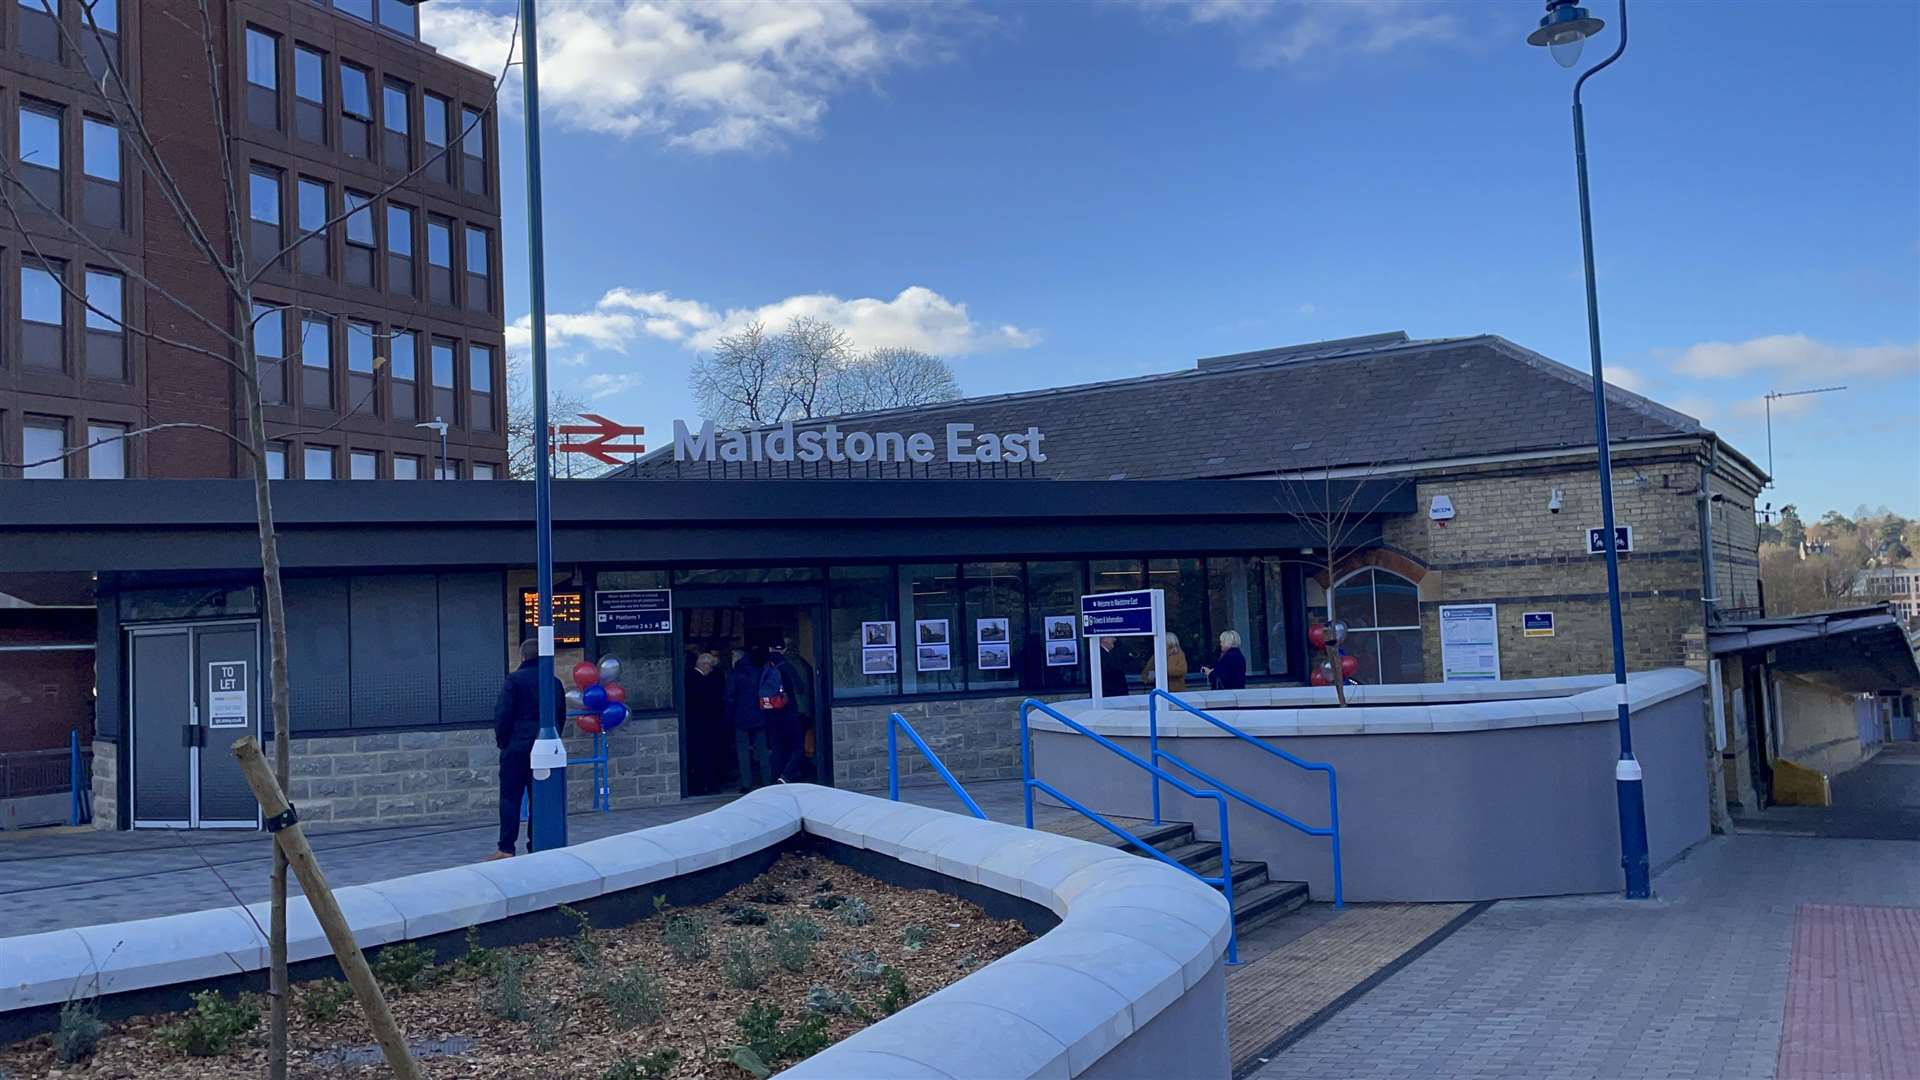 Maidstone East has officially opened after a £5million investment